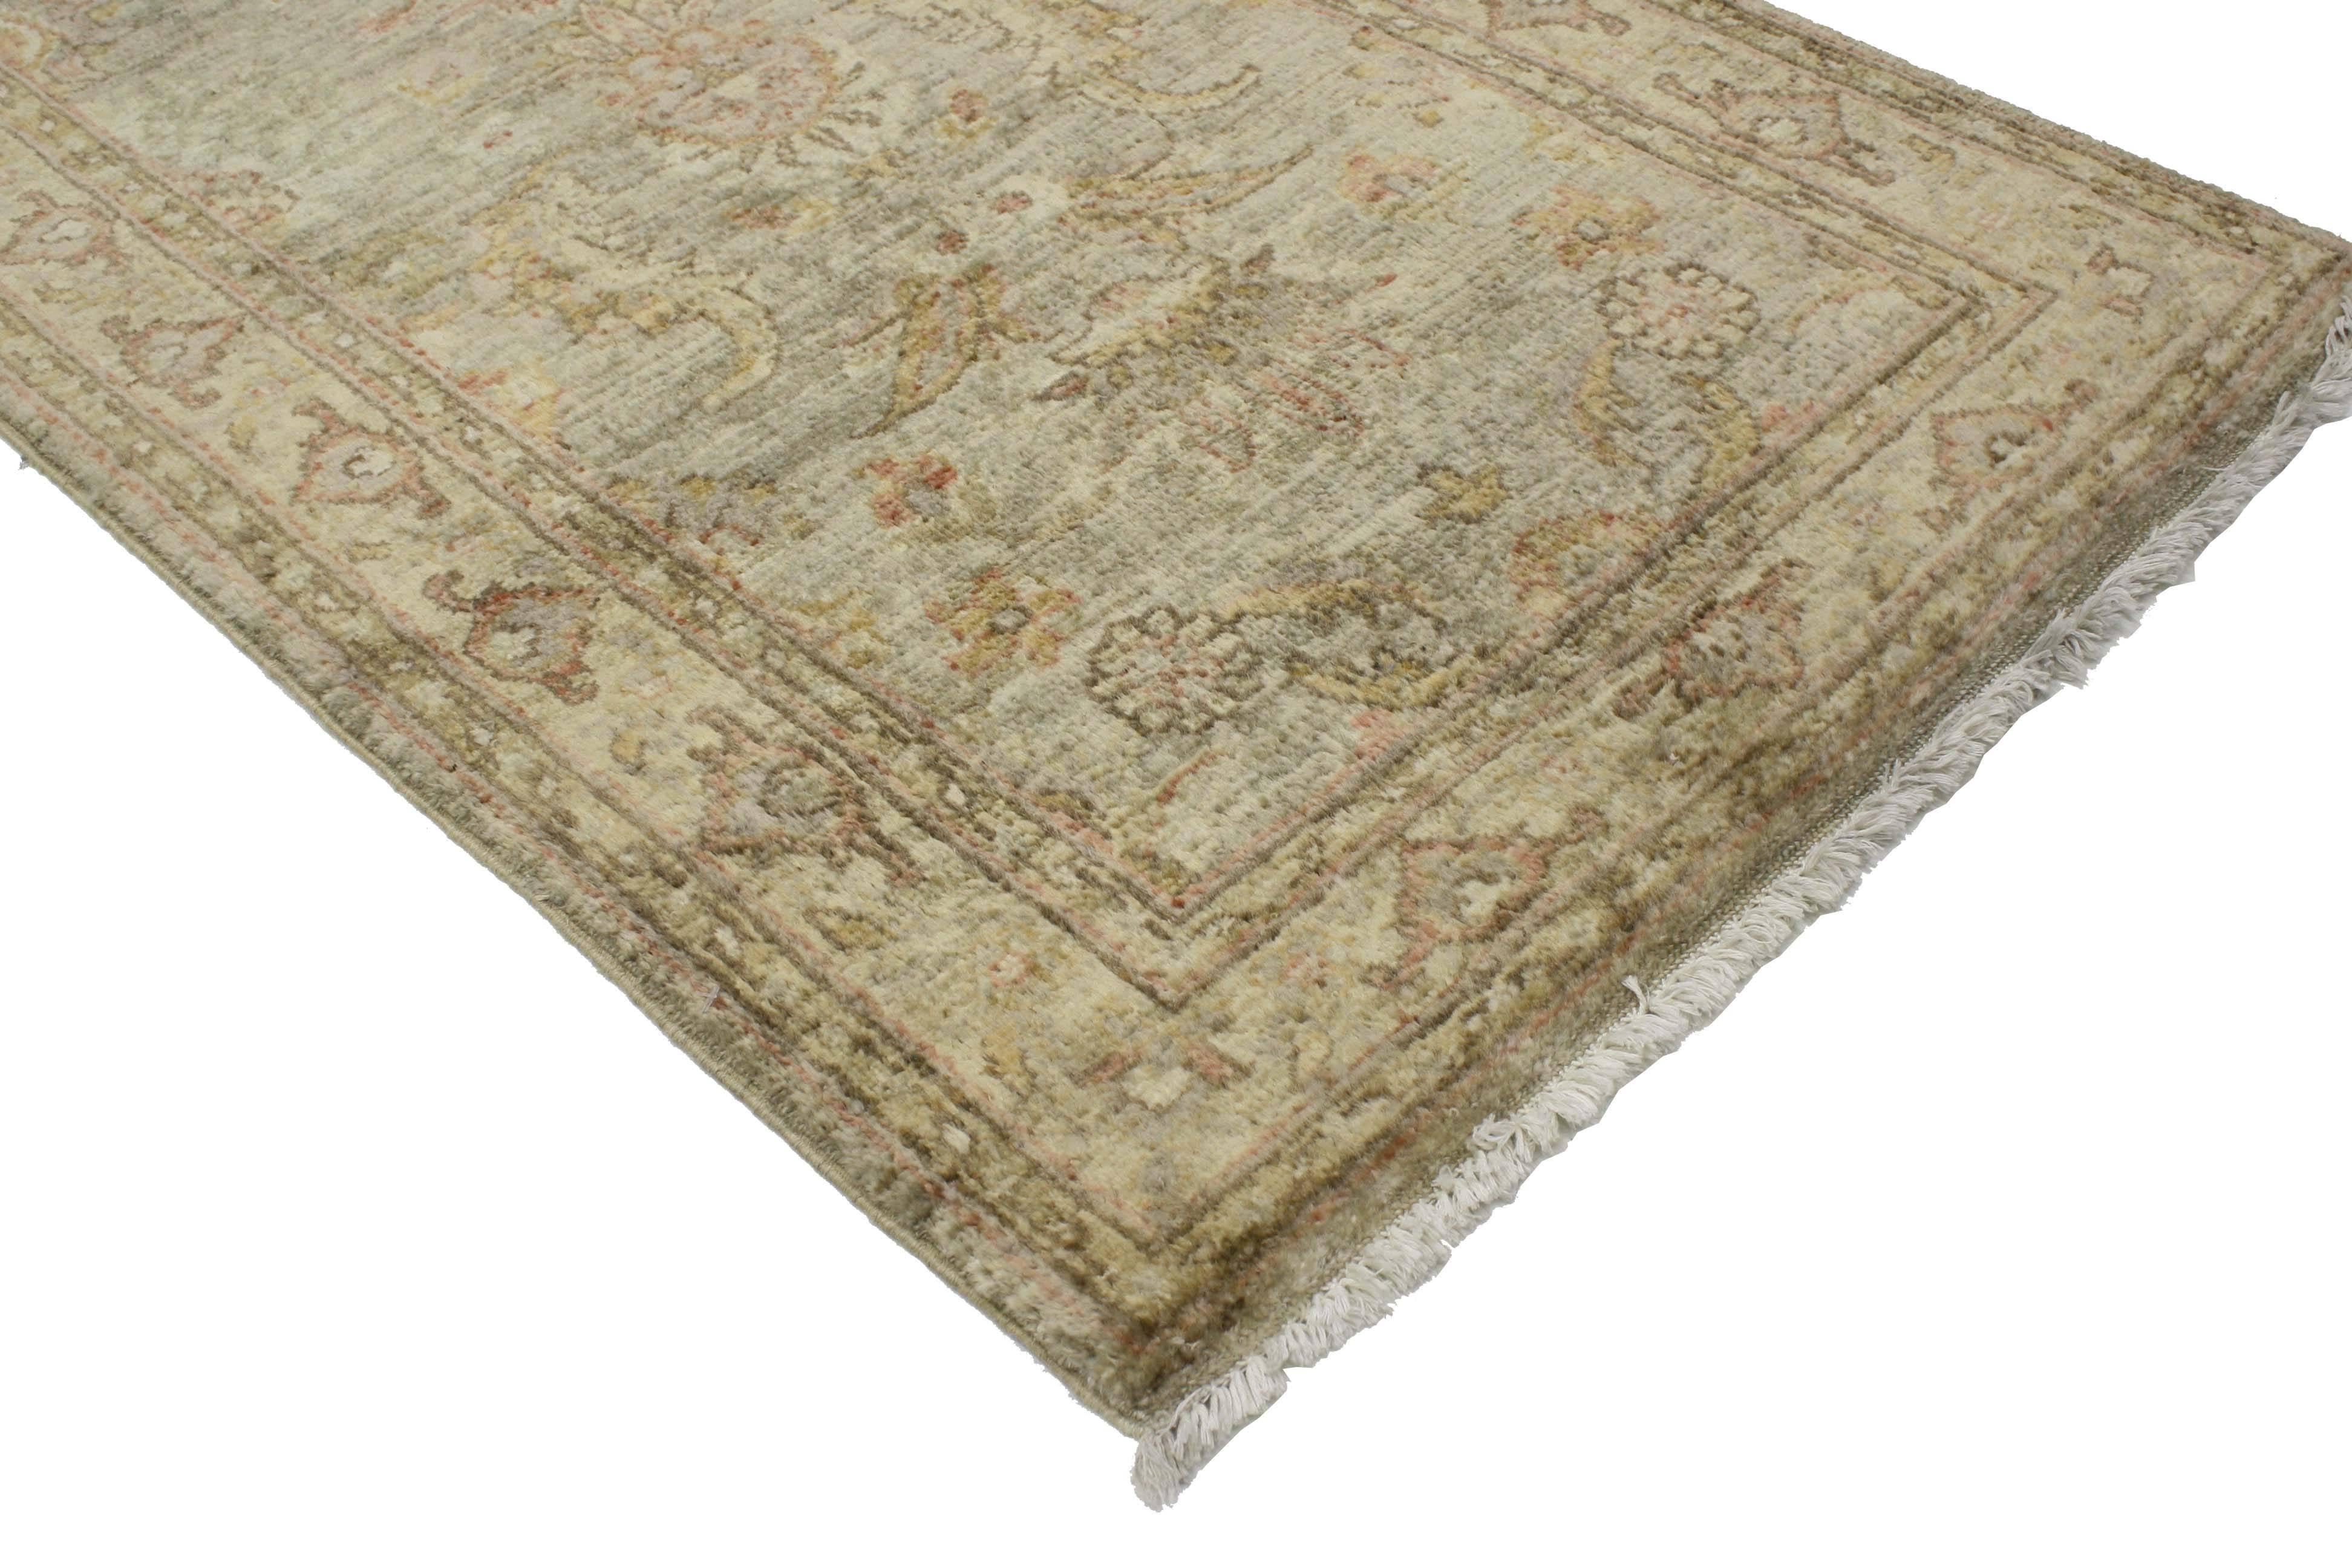 76919 Vintage Hallway Runner with Transitional Style. Representing a stylish Union of traditional and sophisticated chic, this vintage Indian runner features transitional style and warm colors. Highlighting its traditional all-over geometric